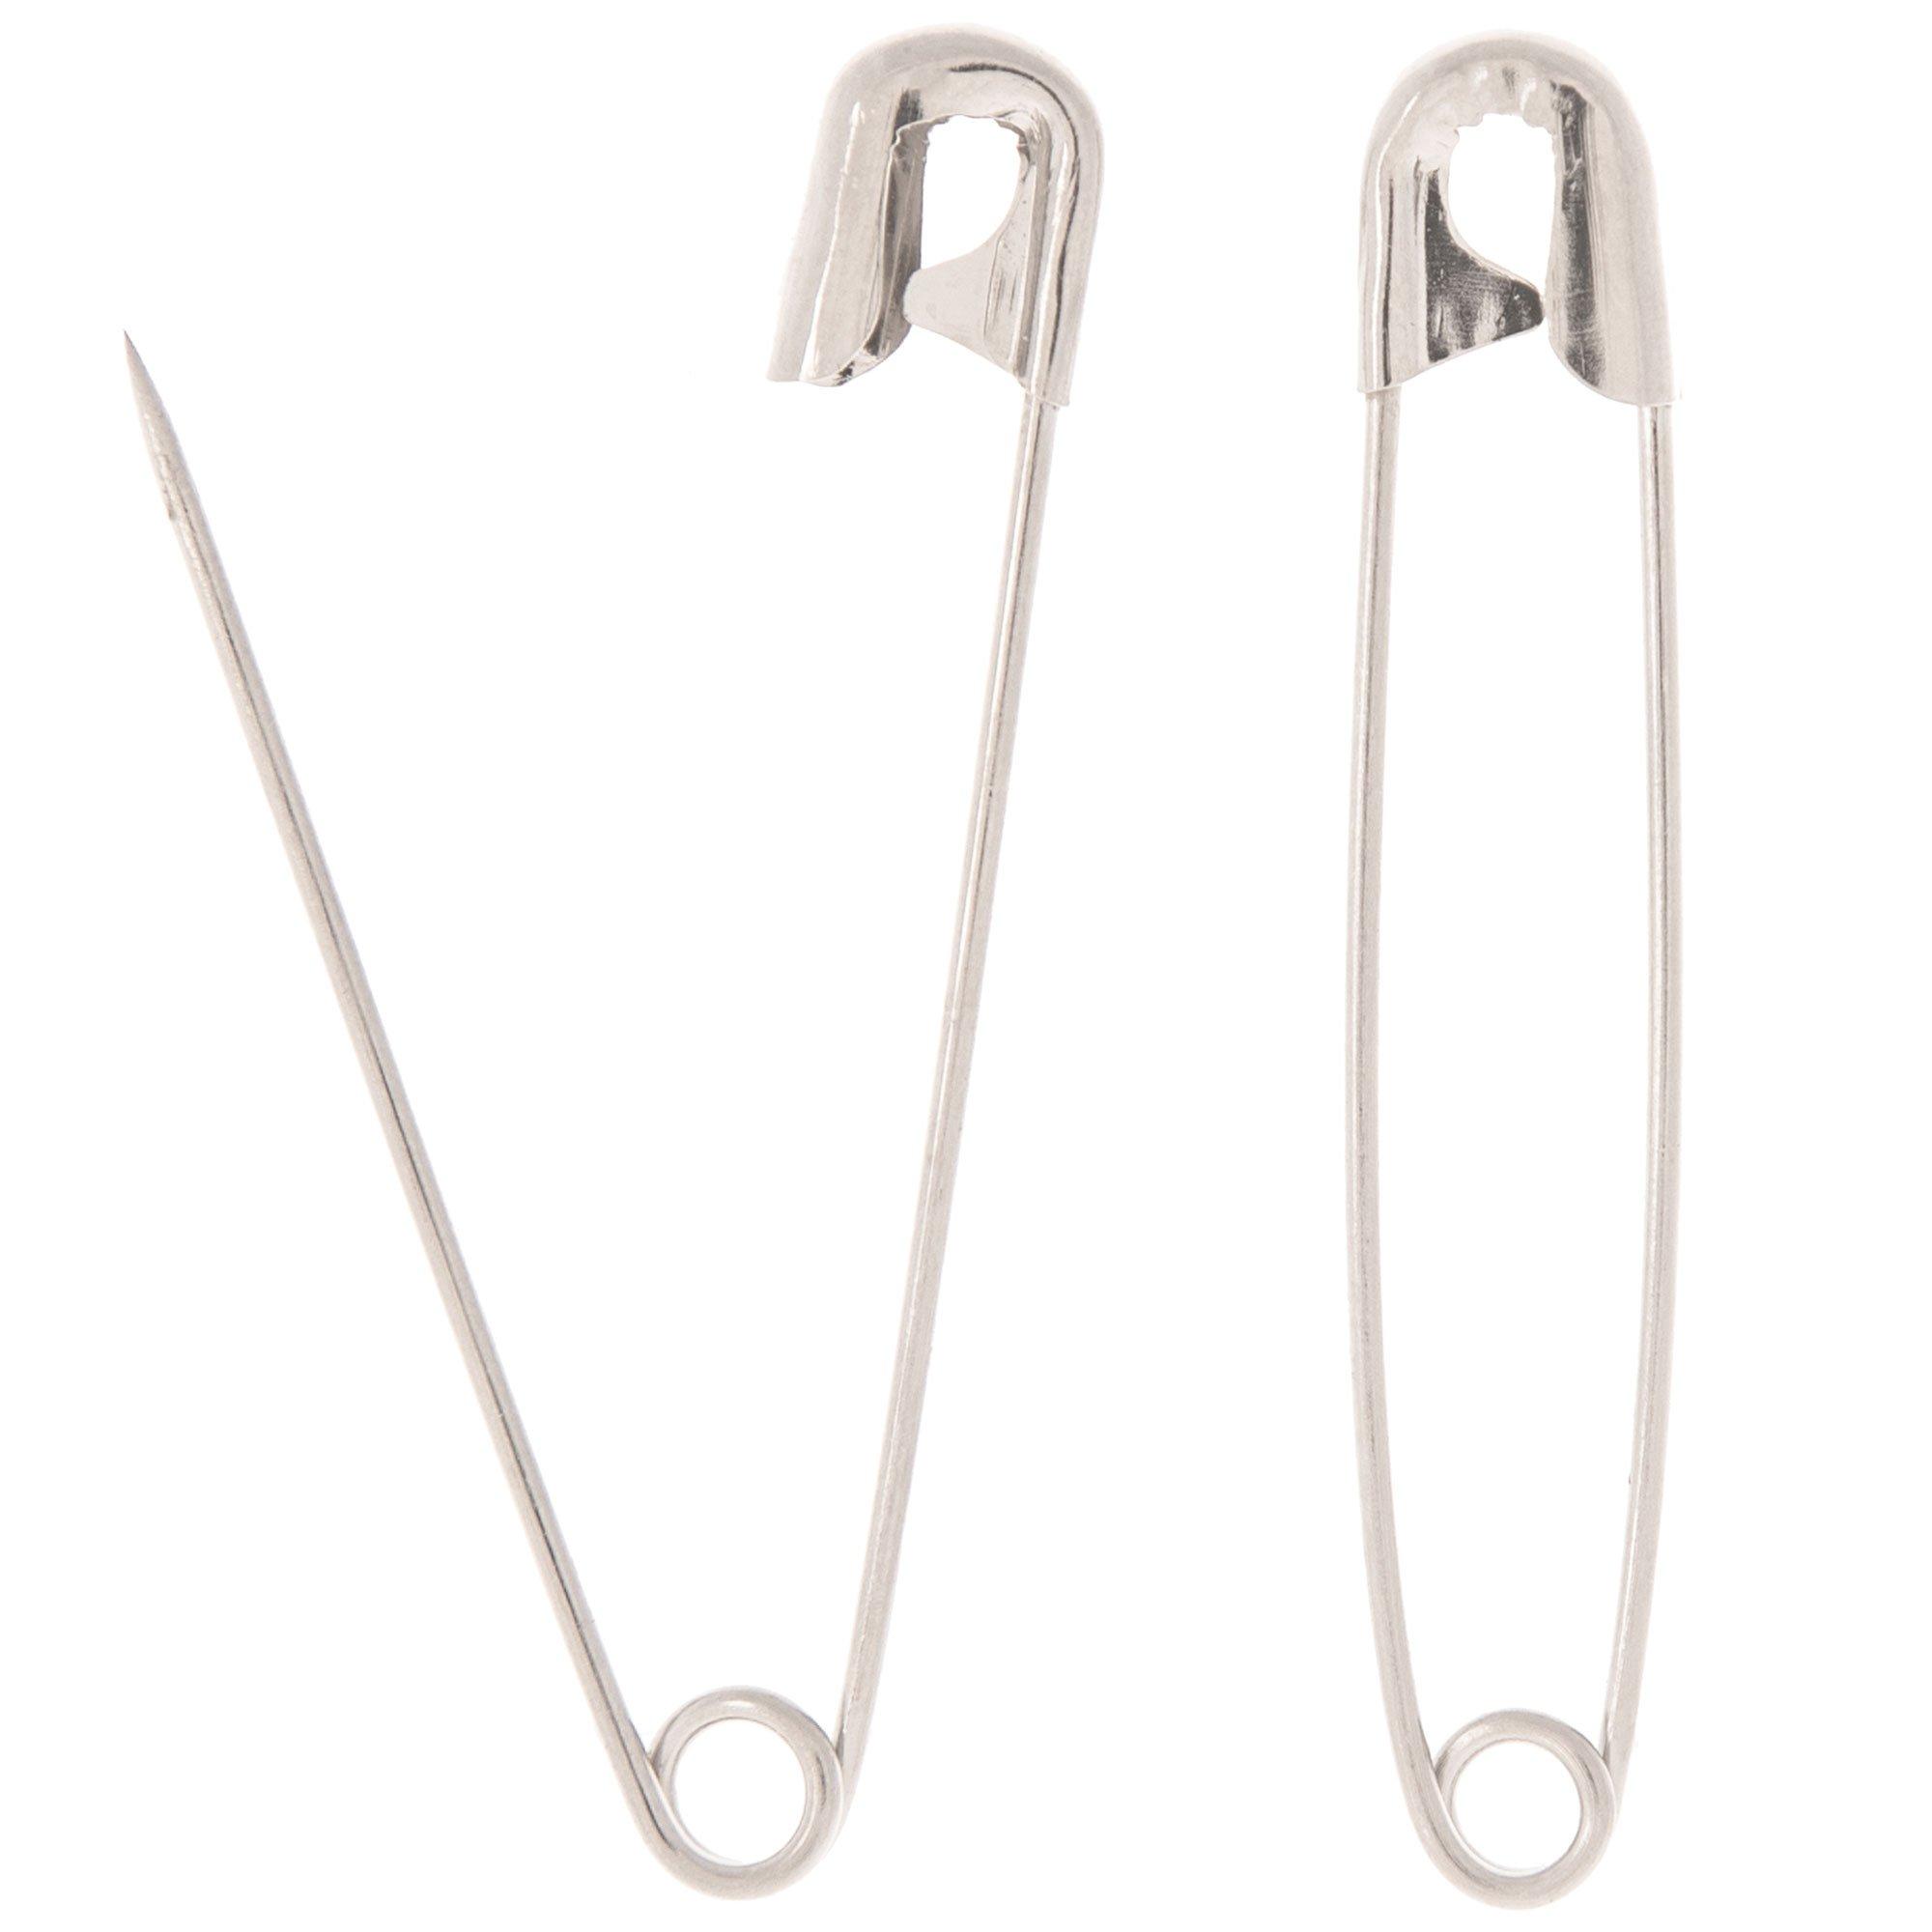 Safety Pins: Types, Sizes, and How to Use Them